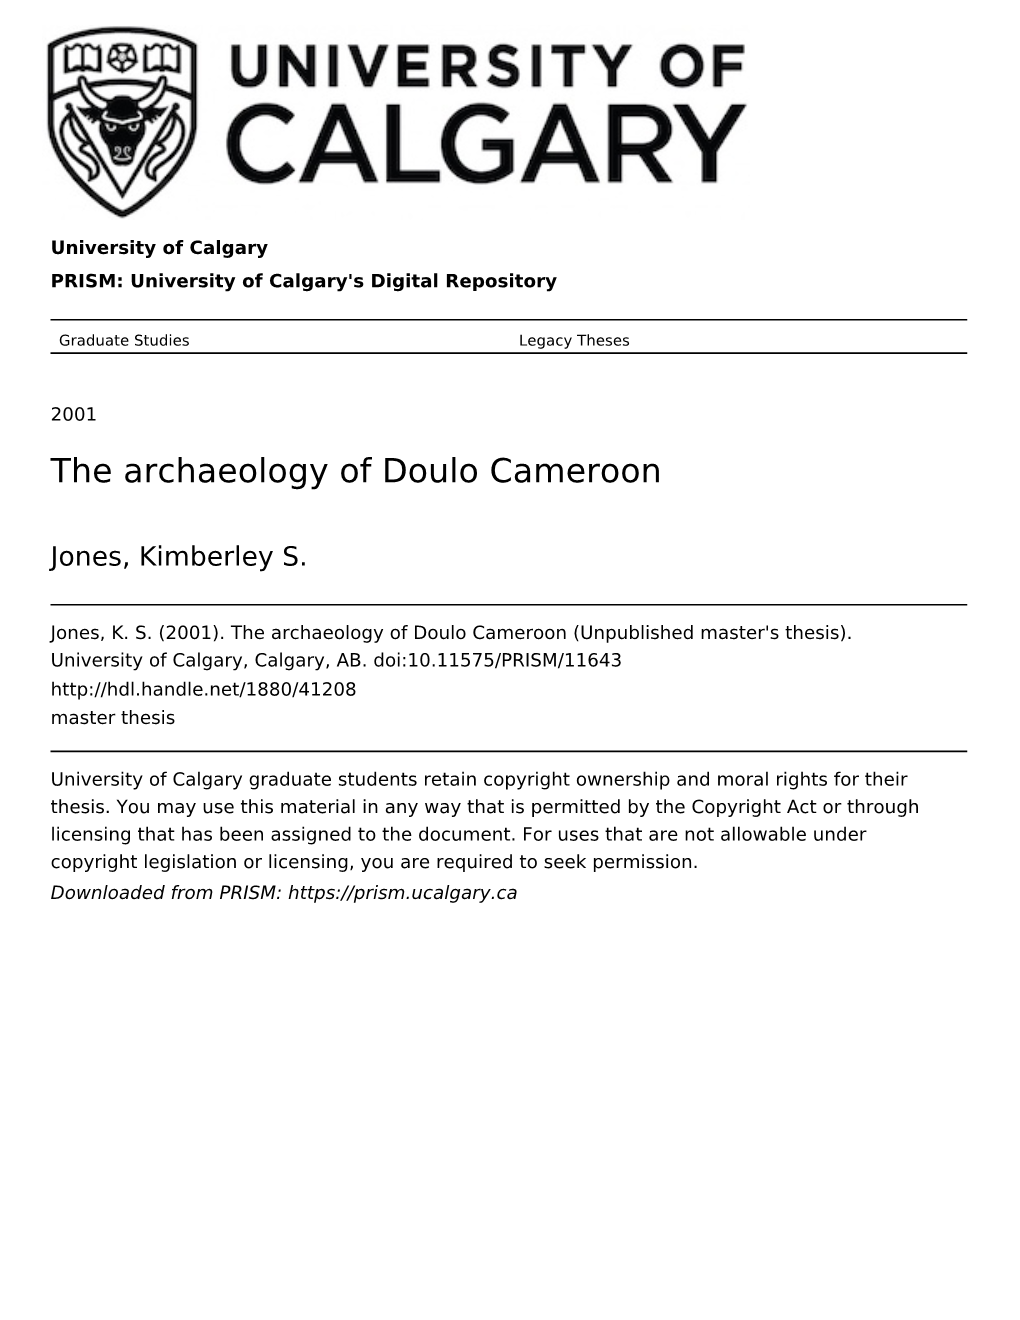 The Archaeology of Doulo Cameroon